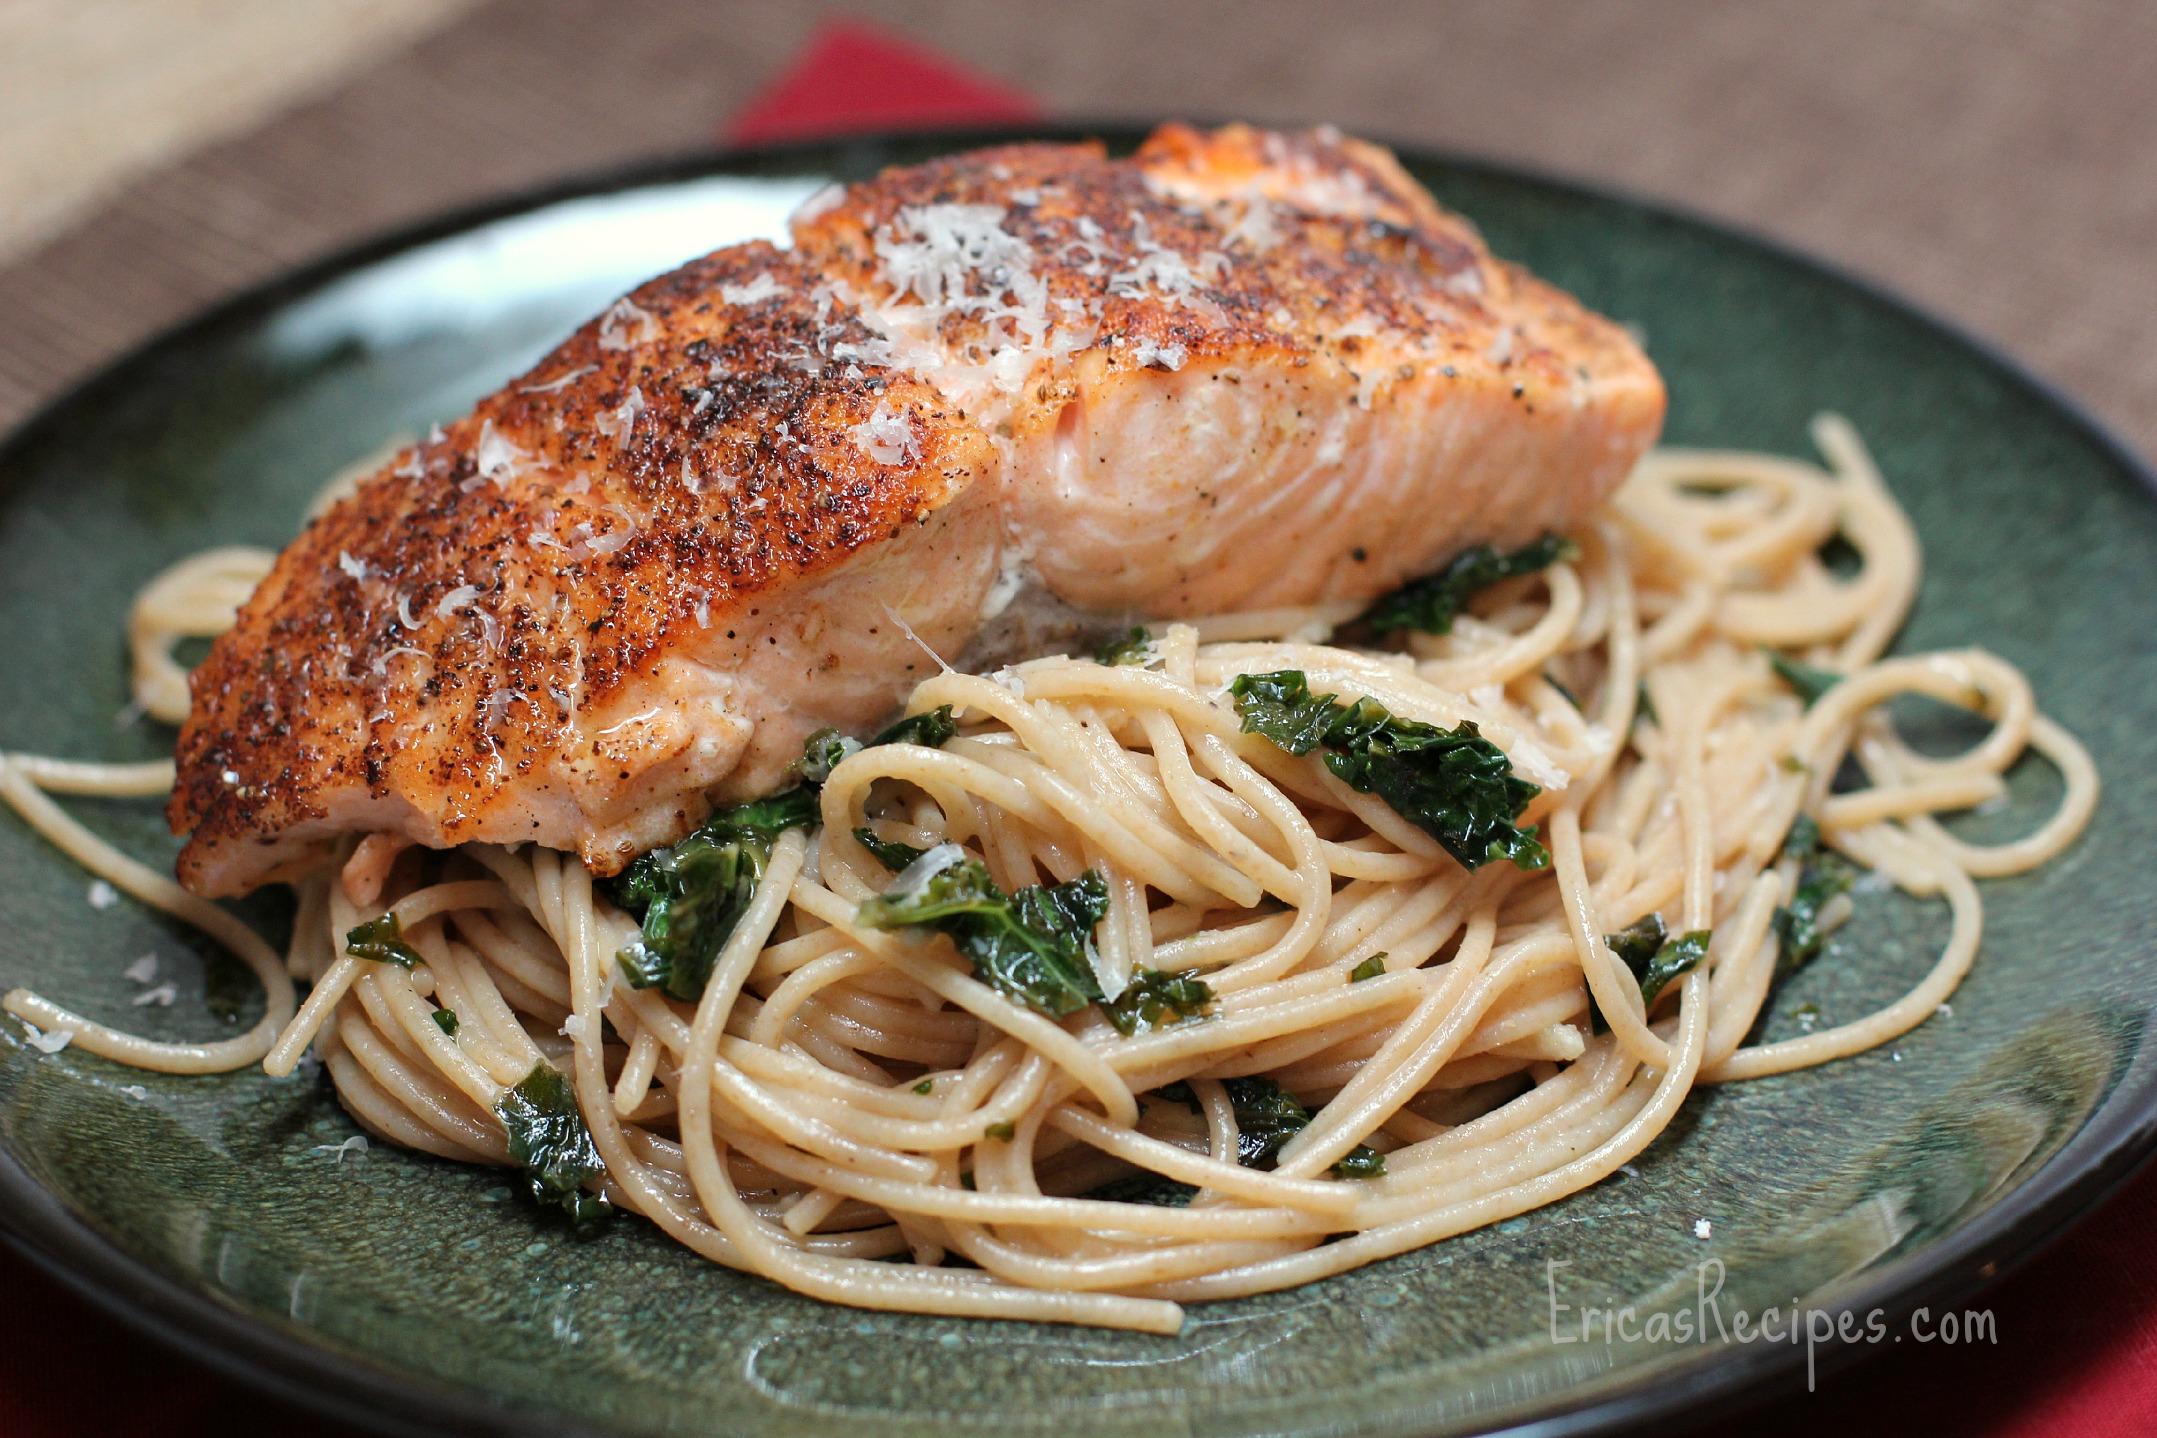 Seared Salmon over Whole Wheat Pasta with Kale, Garlic, and Pine ...